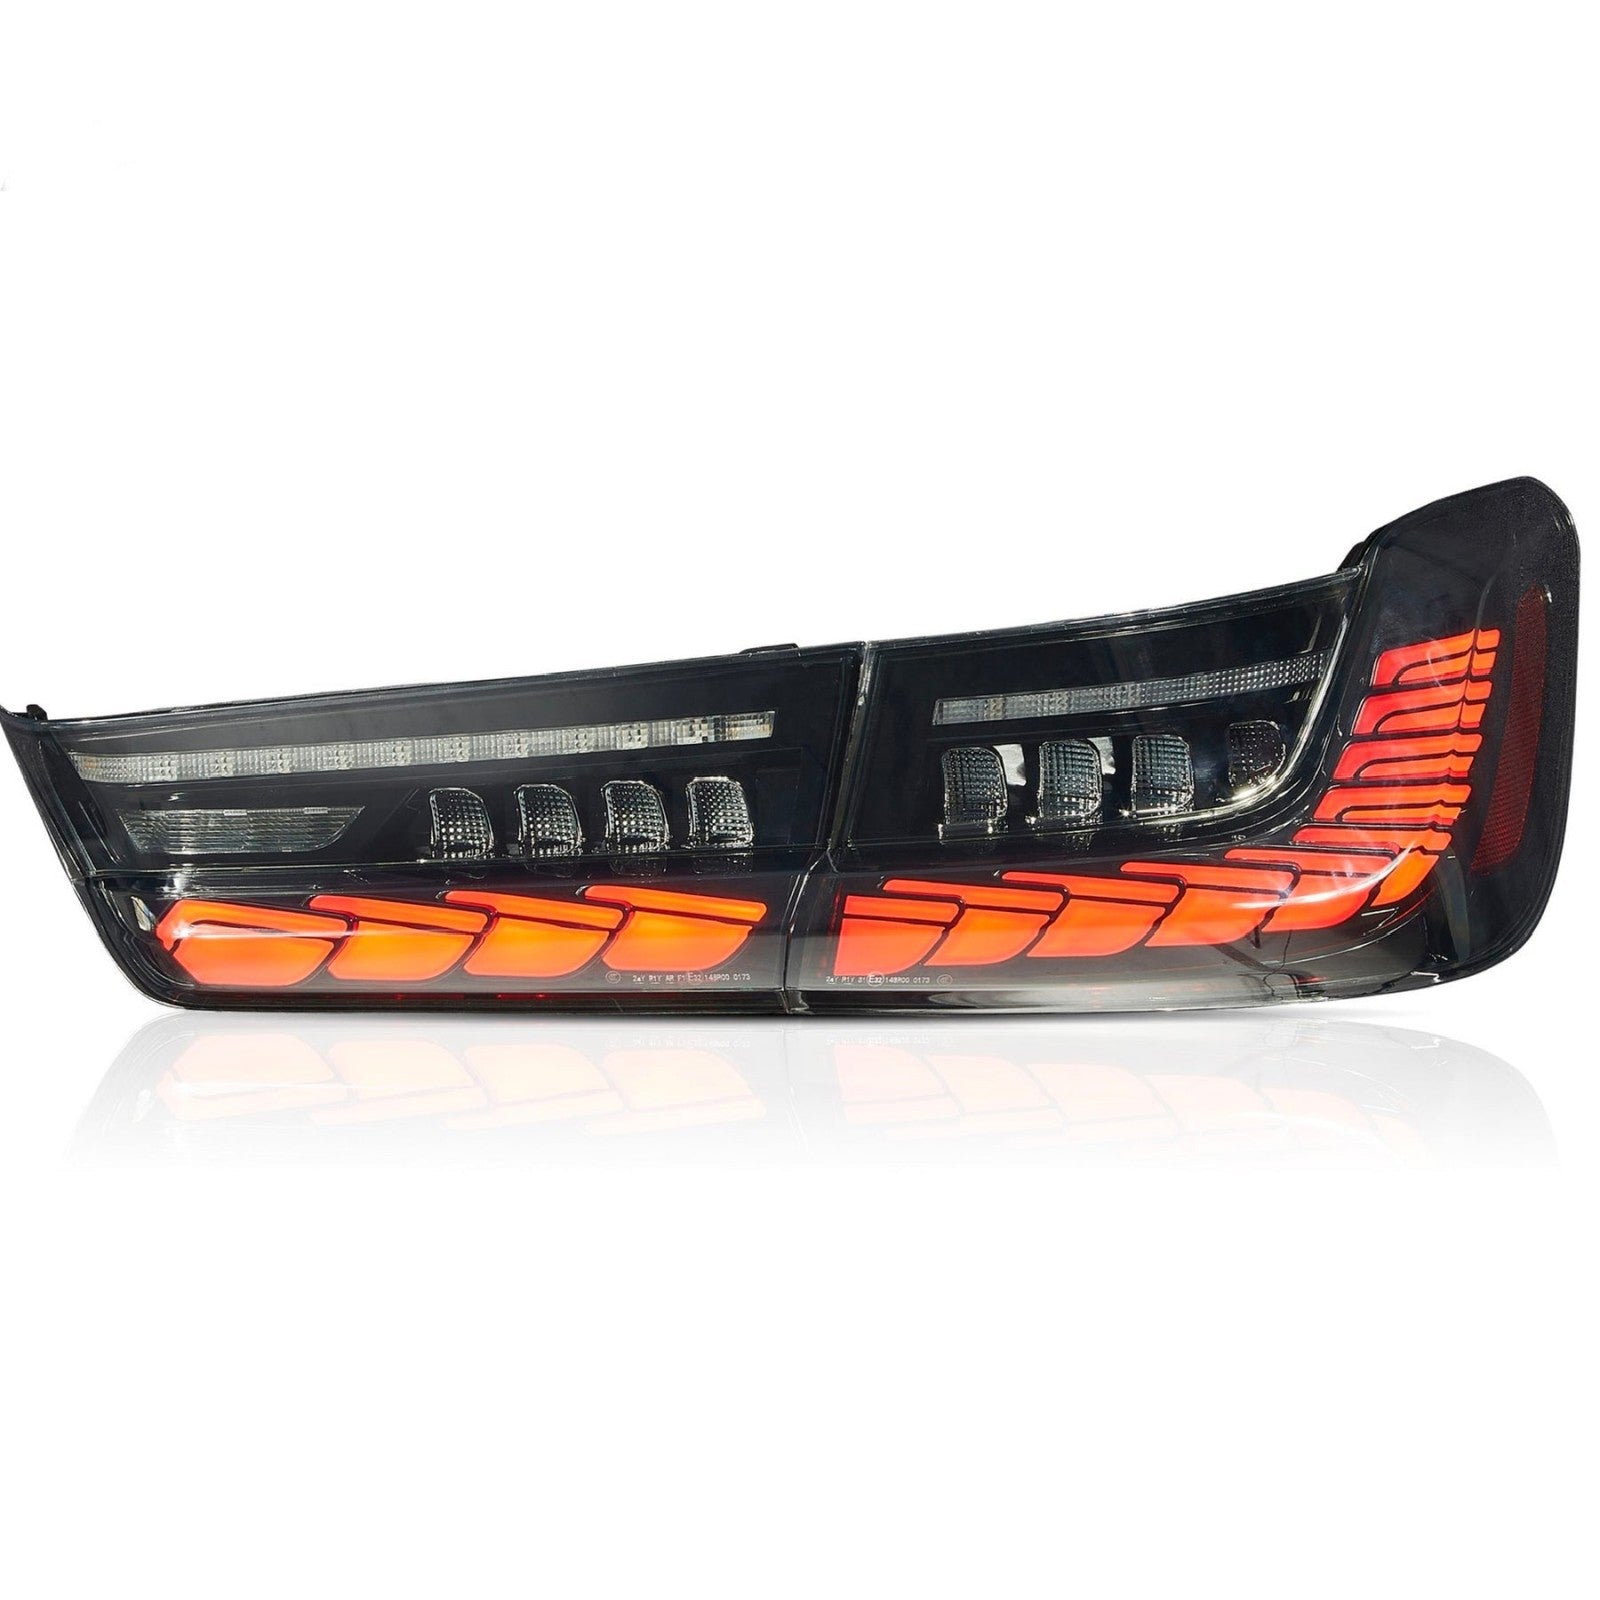 GTS Style V2 OLED Taillights - BMW G80 M3 & G20 3 Series